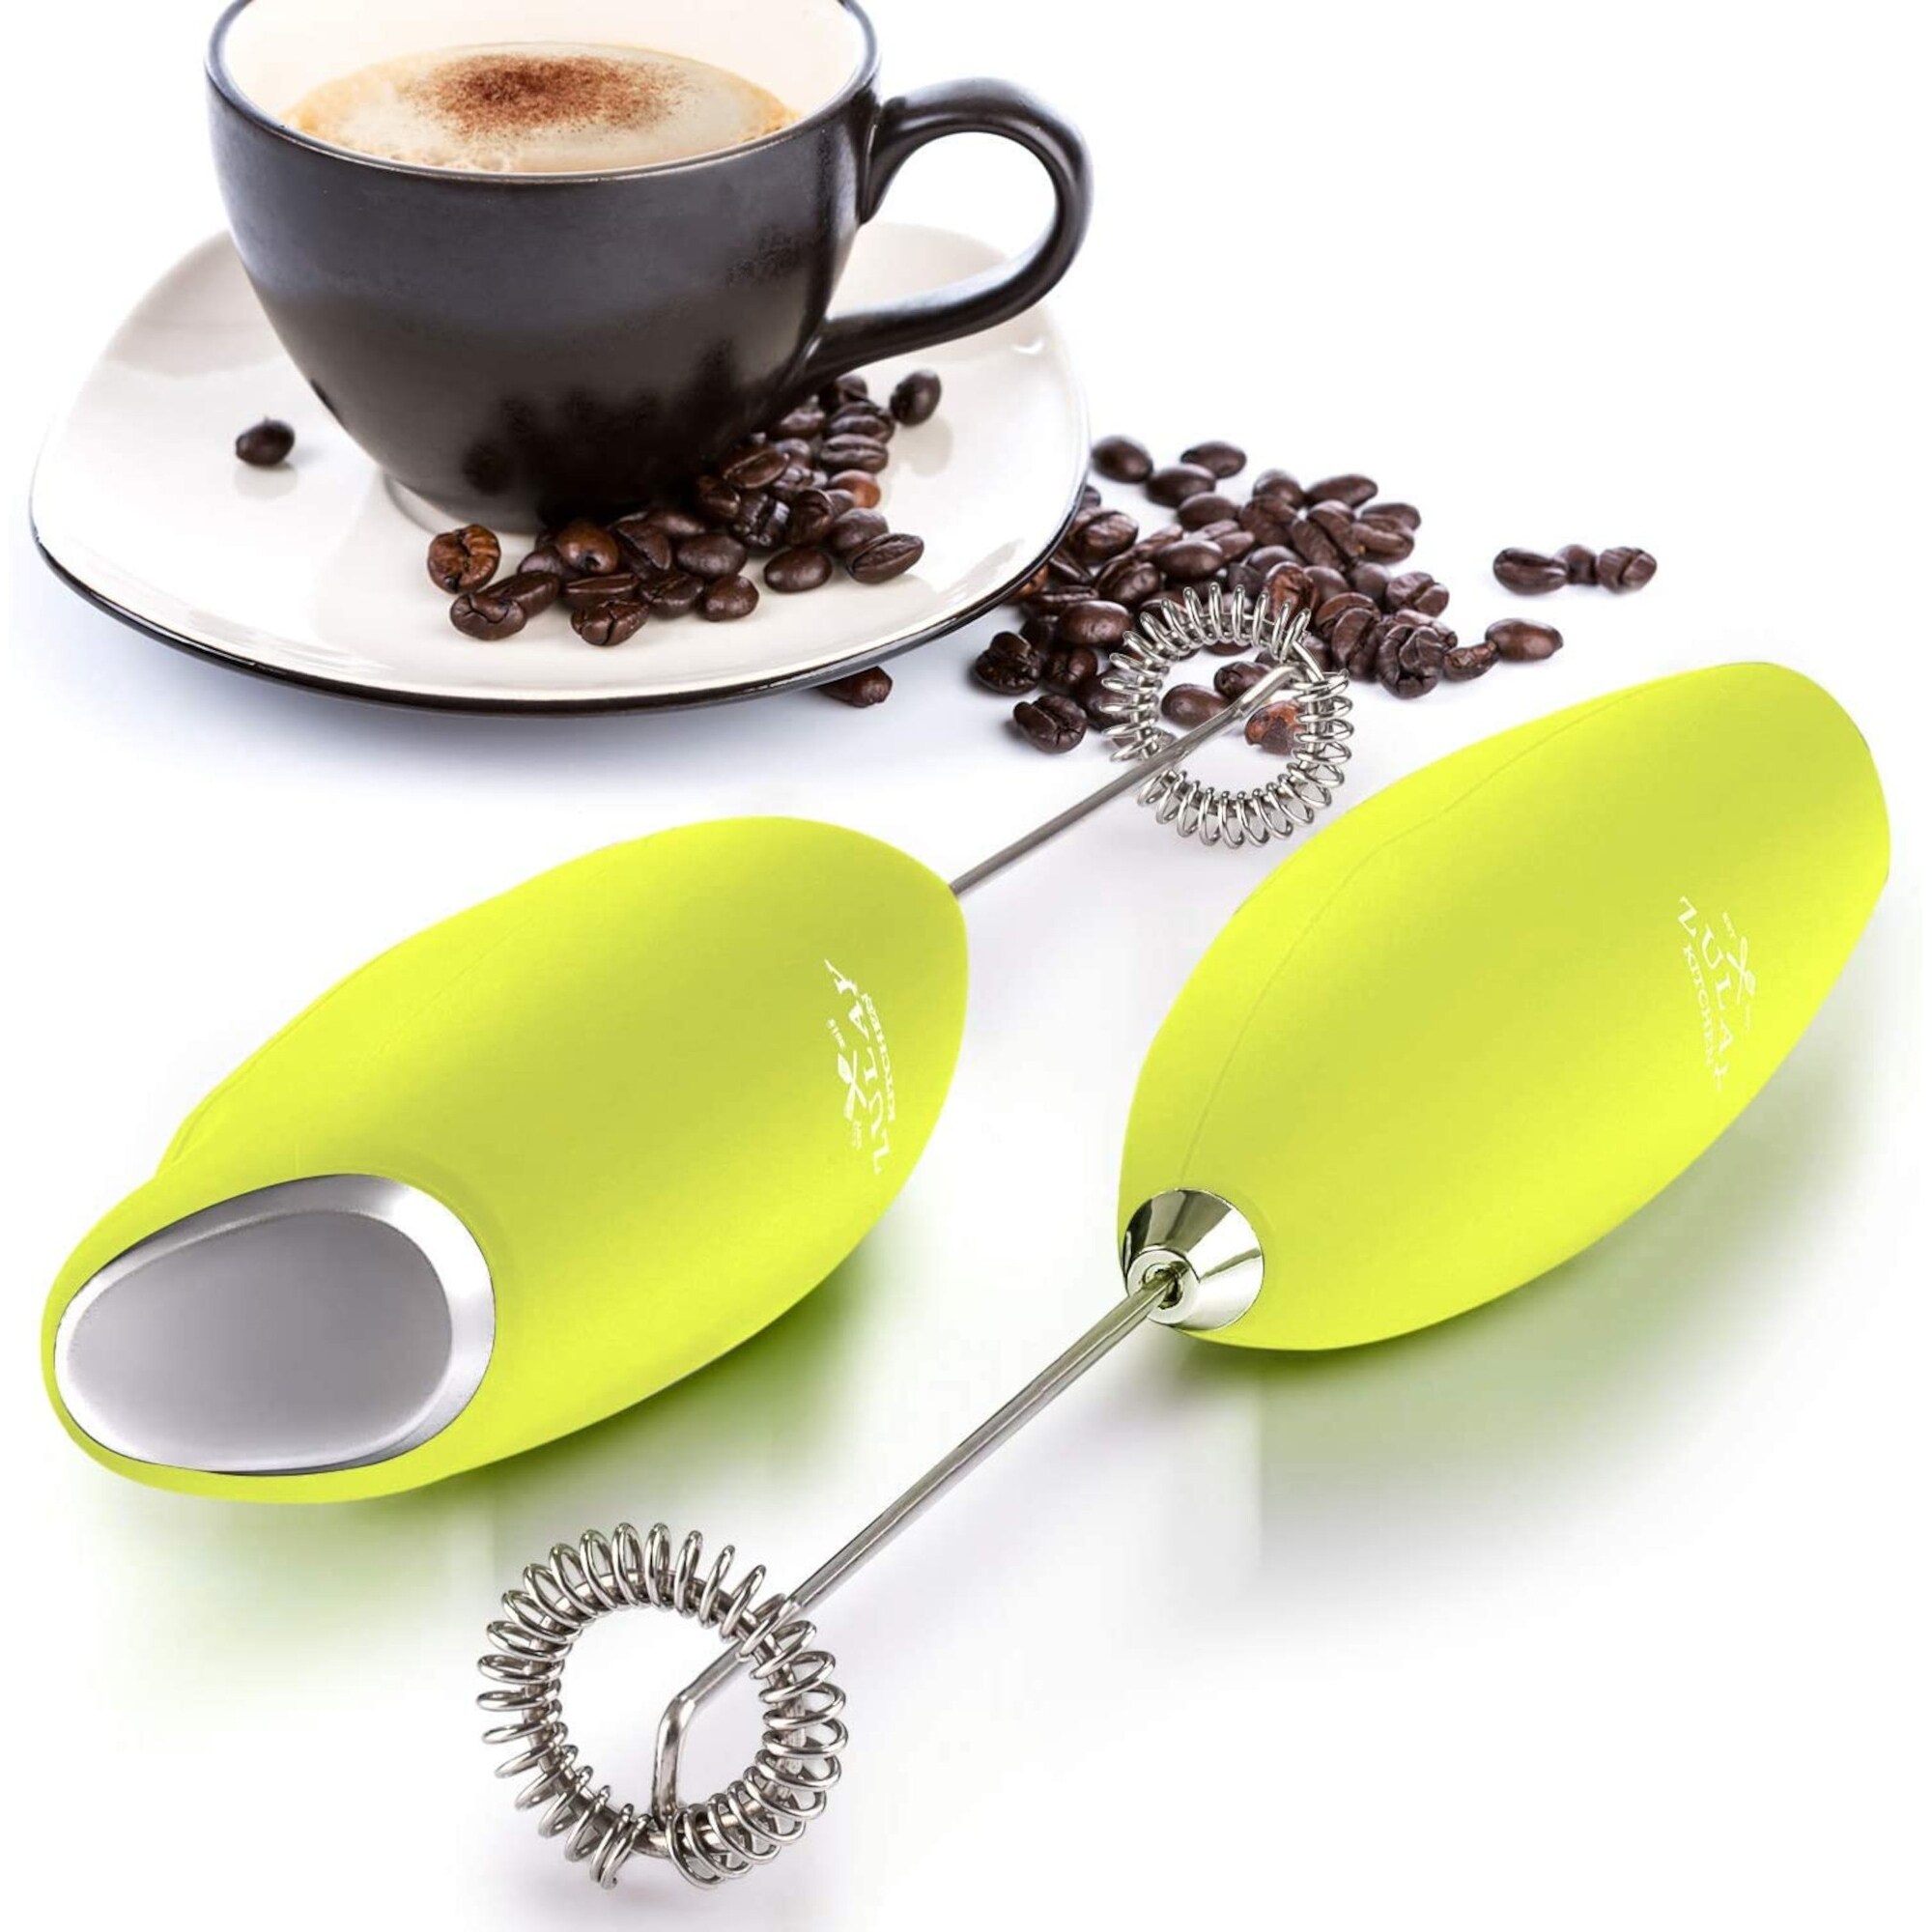 https://ak1.ostkcdn.com/images/products/is/images/direct/295adbe99bde5676f7a7cf8371543591682ed06f/Zulay-Original-Handheld-Milk-Frother-Foamer---Lime-Green.jpg